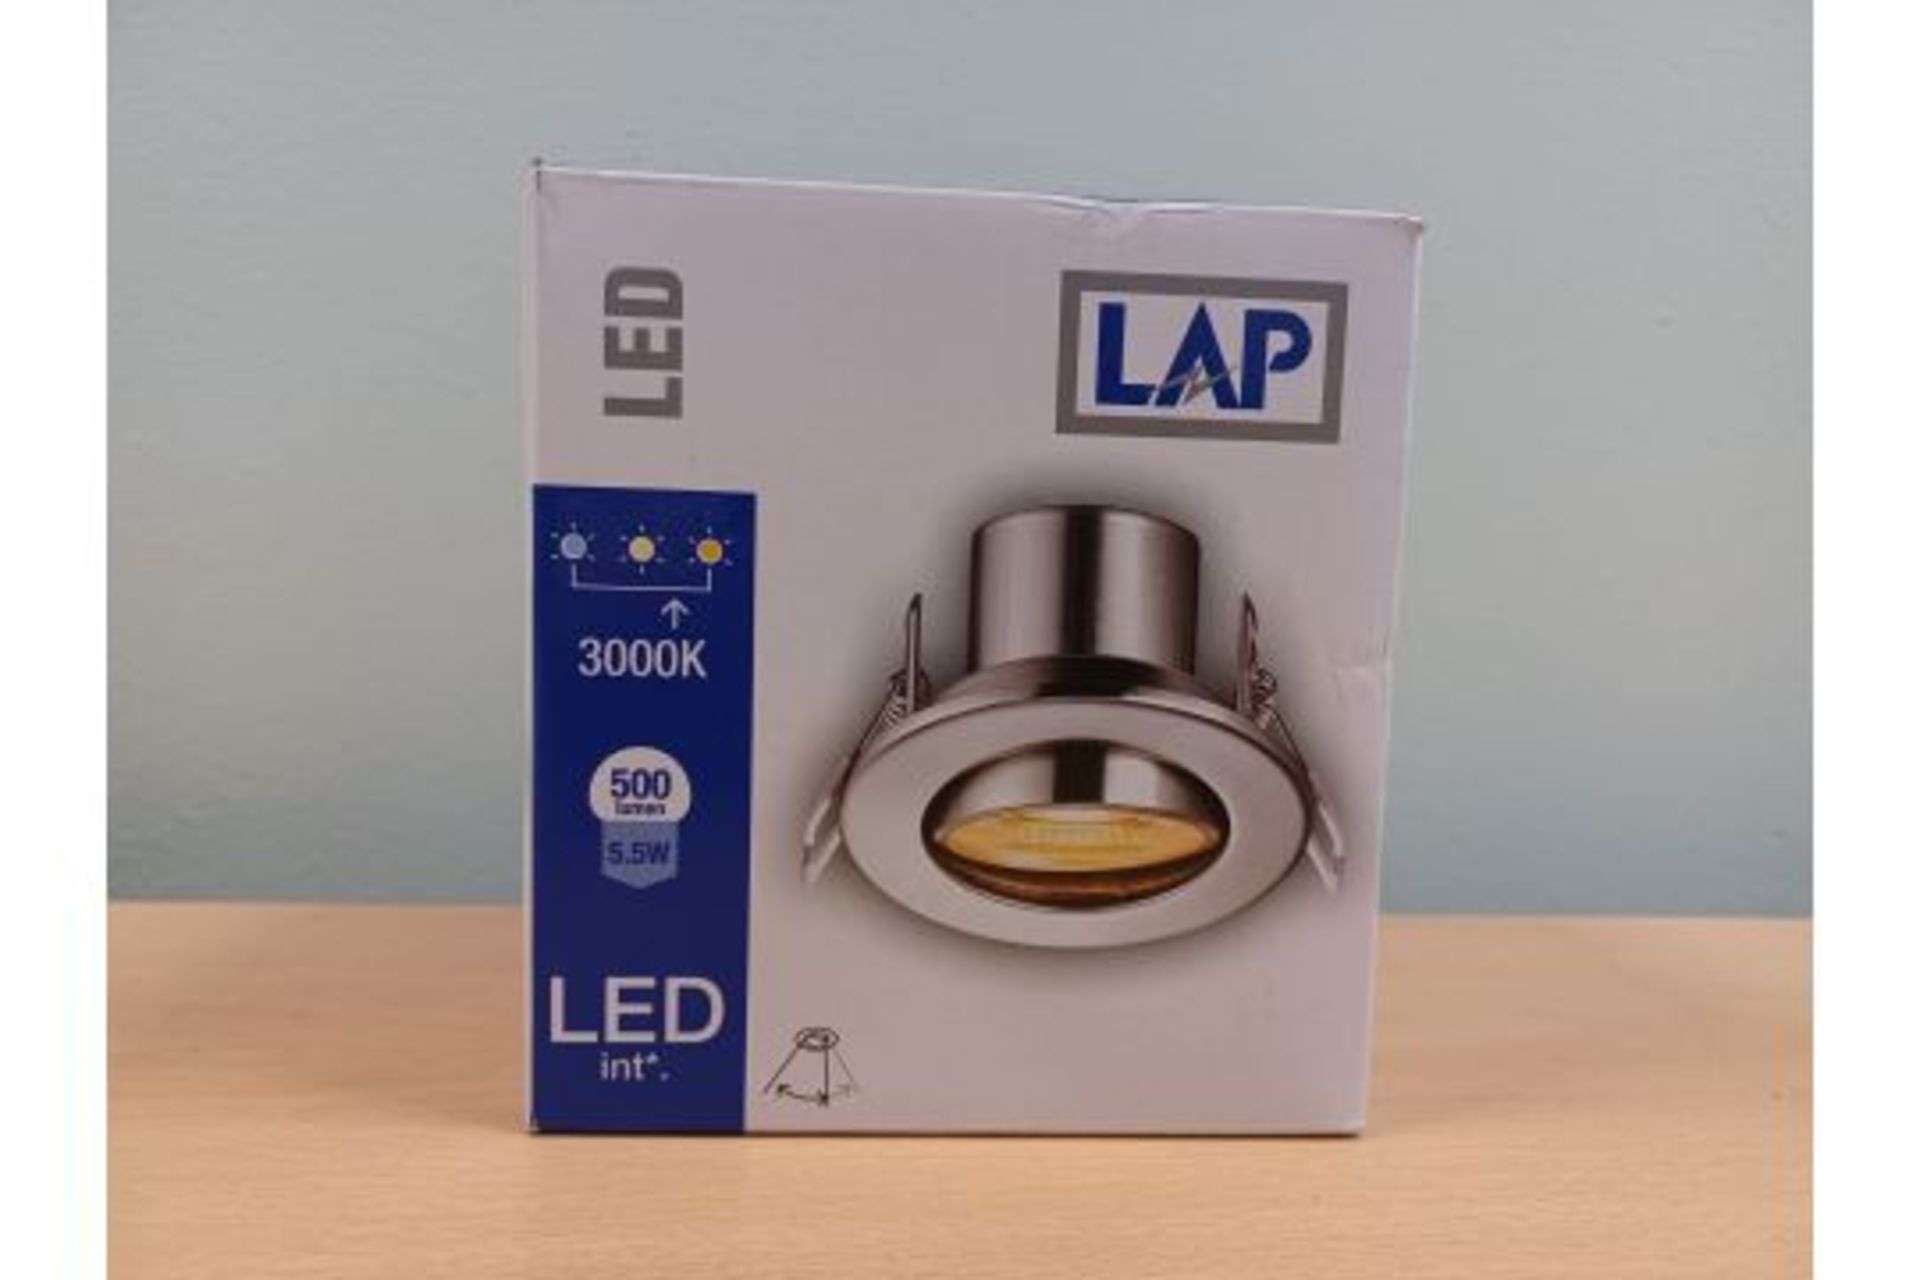 PALLET TO CONTAIN 300 X NEW BOXED LAP SATIN LED DOWNLIGHTS. 500 LUMEN. 5.5W. 3000K. TILTABLE (ROW